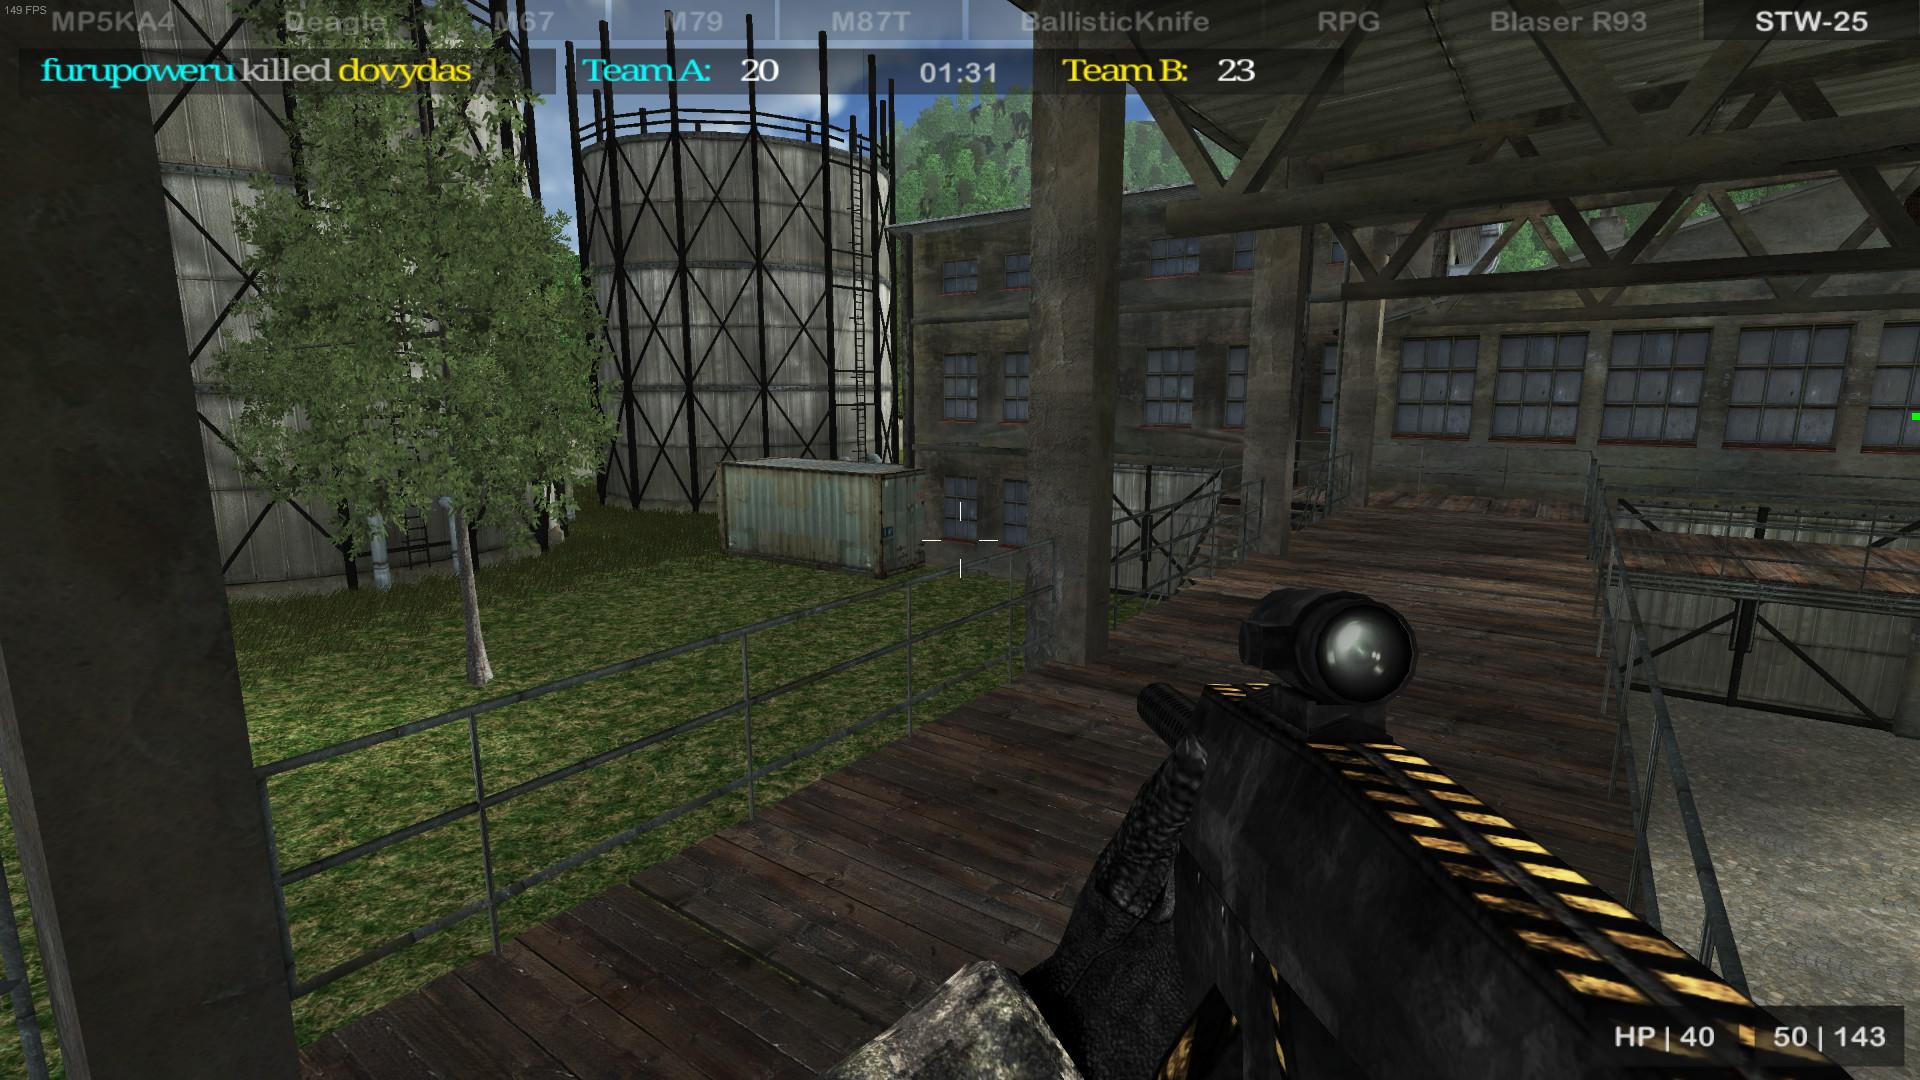 Screenshot №3 from game Masked Shooters 2